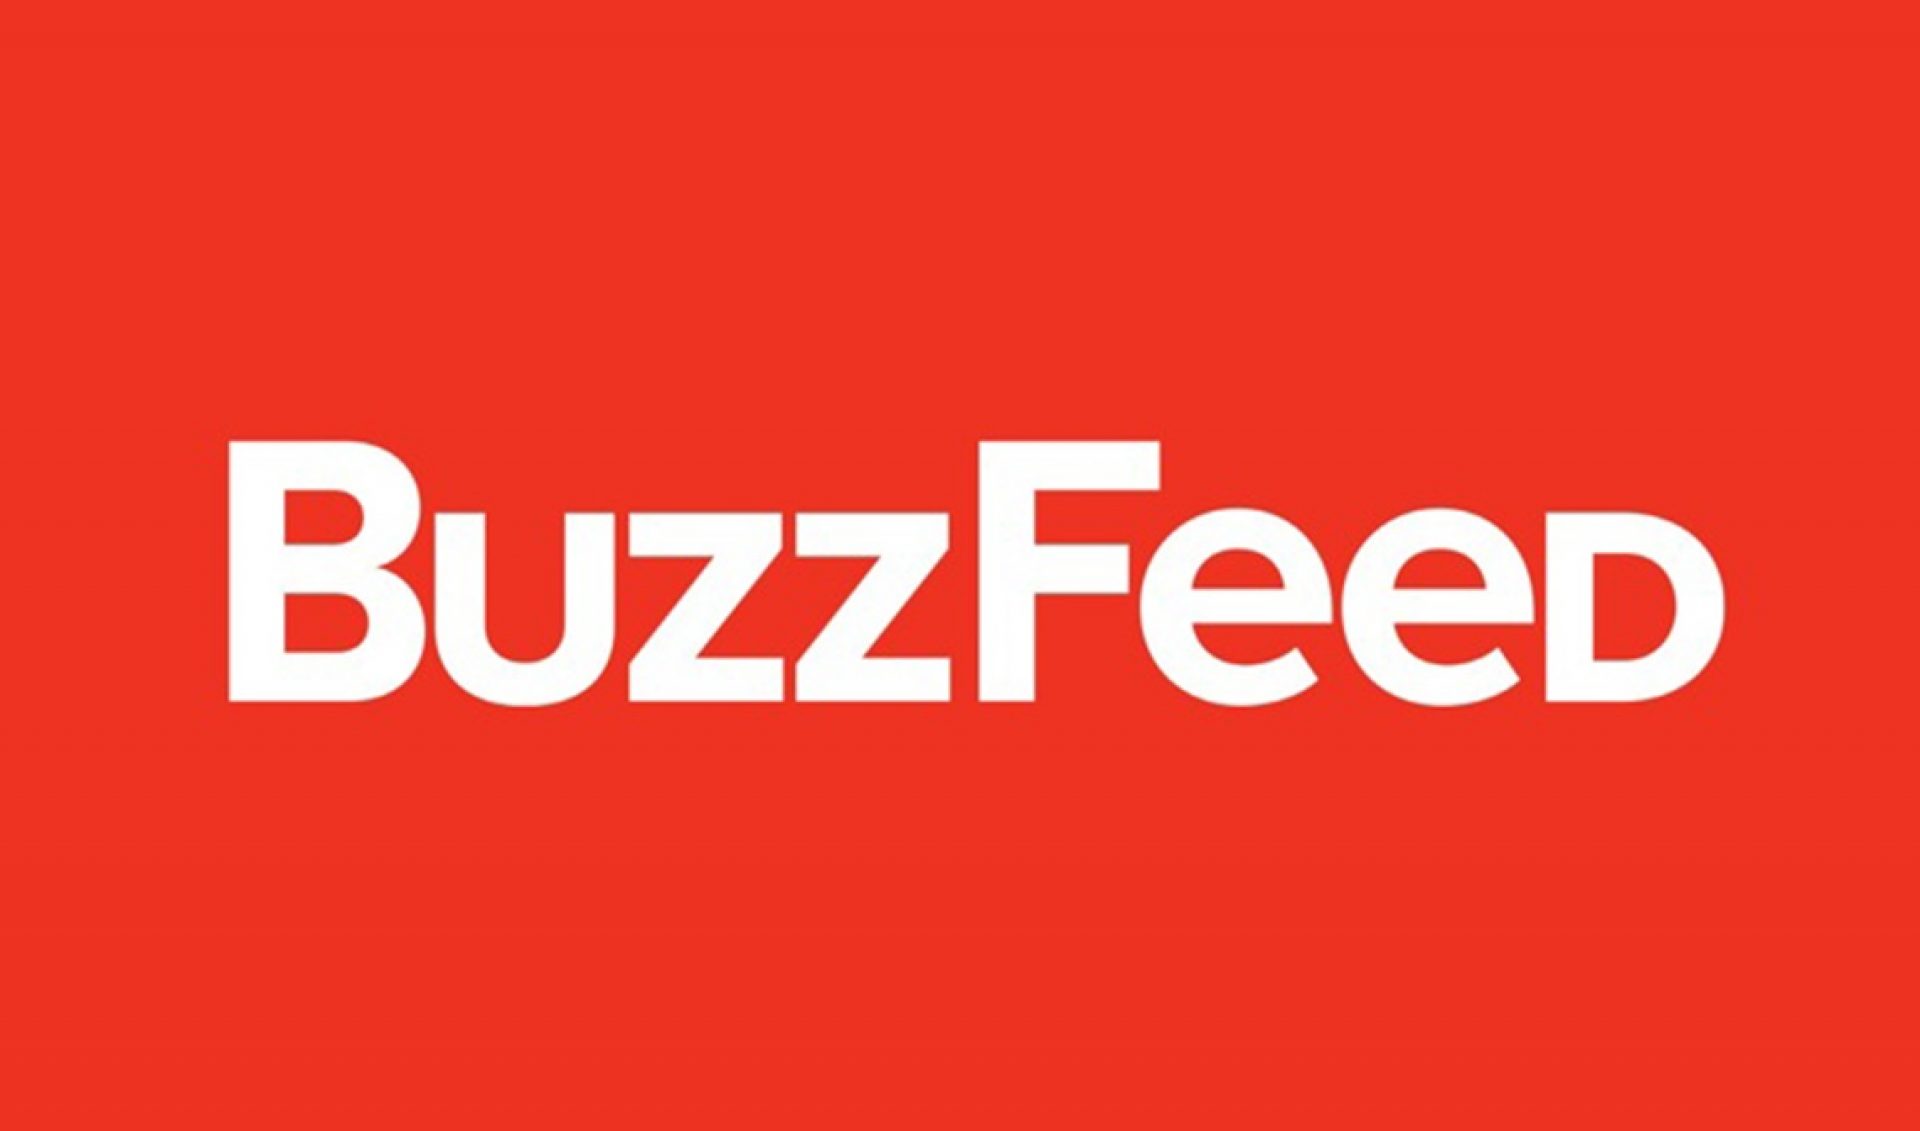 BuzzFeed, Keshet Will Develop Israeli Game Show ‘Touch’ To Air Digitally And On TV